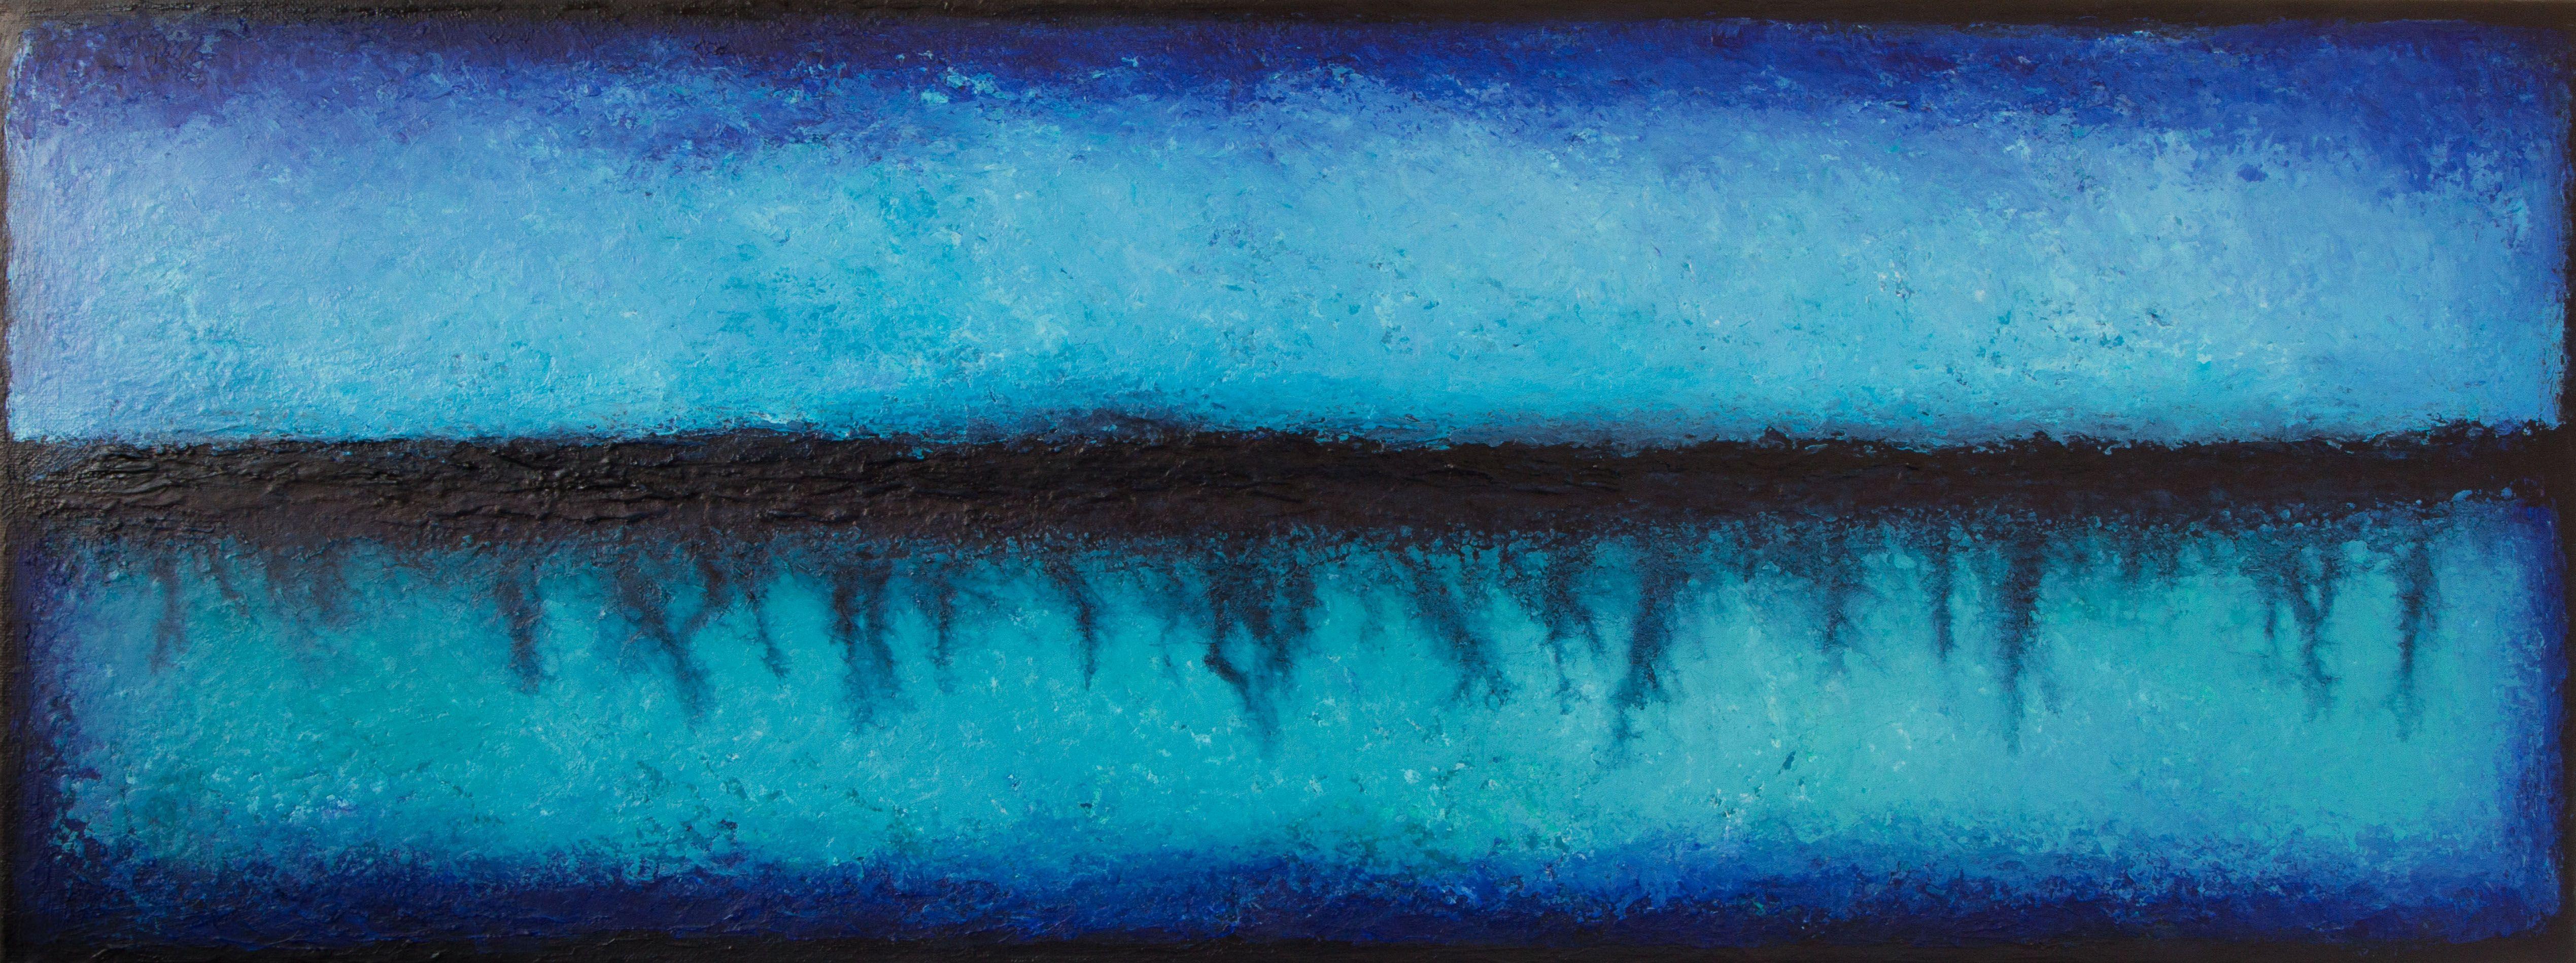 Stefan Fierros Abstract Painting - Blue horizon  - 2, Painting, Acrylic on Canvas